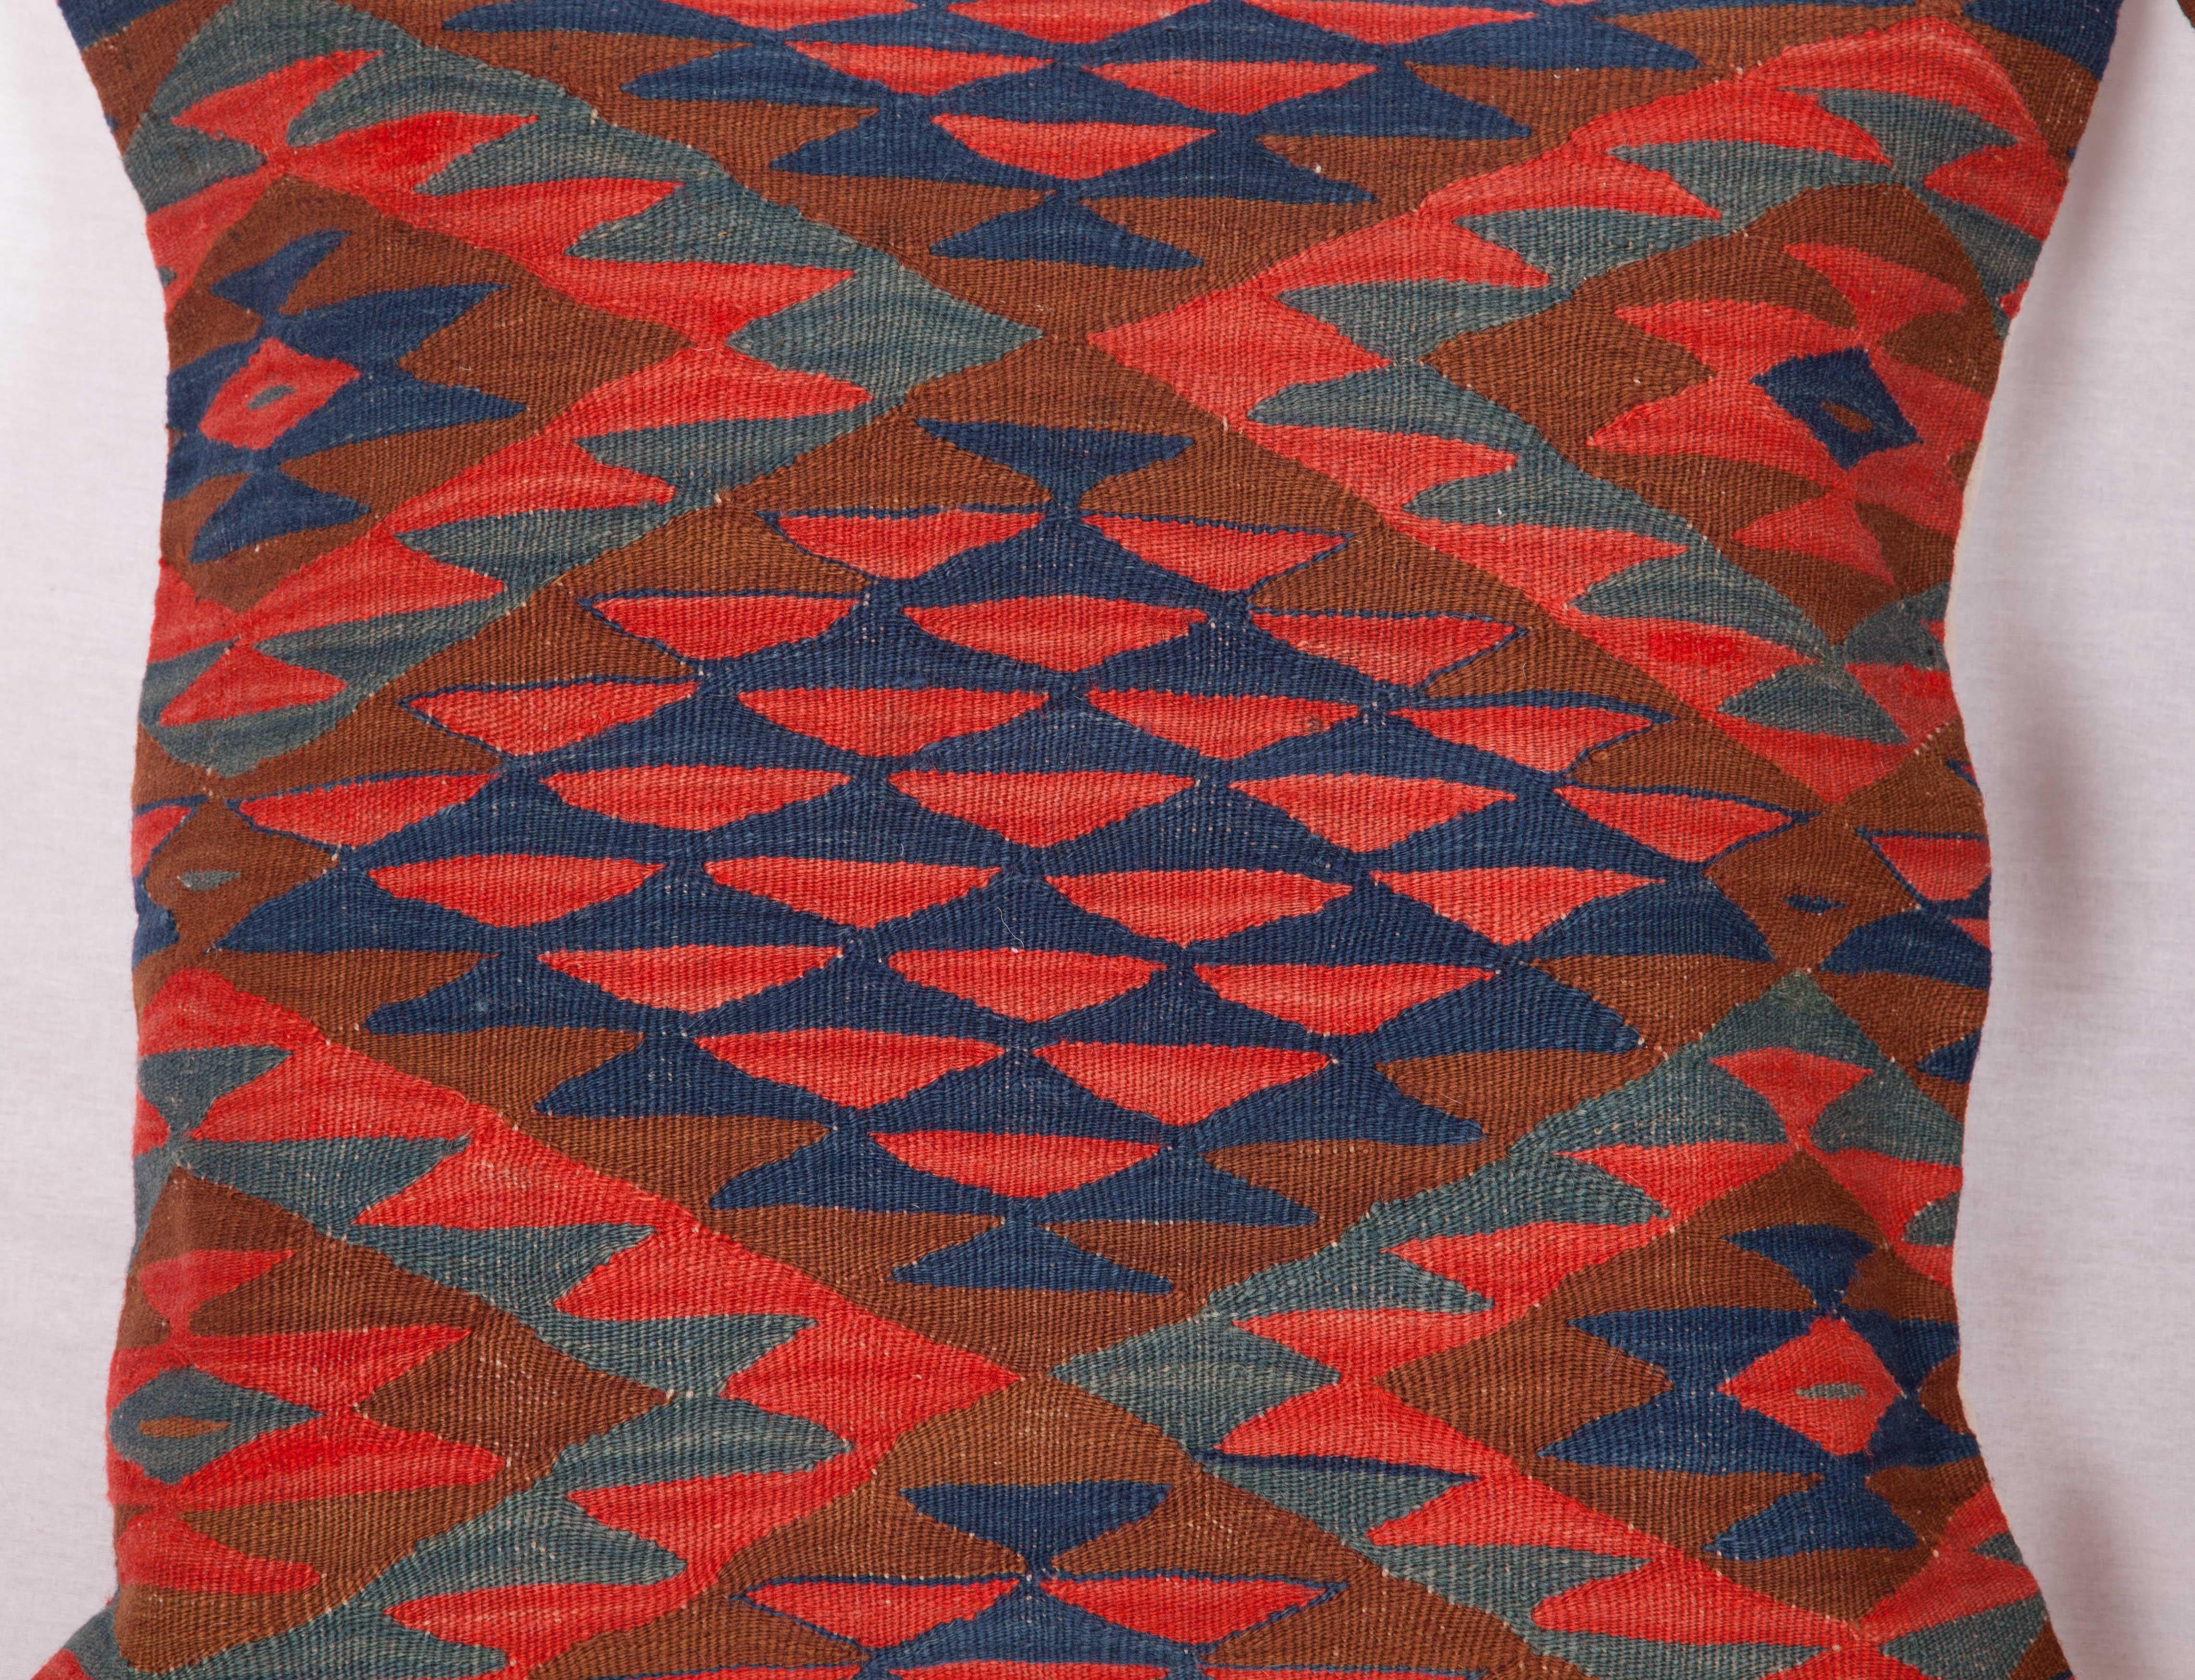 Hand-Woven Antique Kilim Pillow Cases Fashioned from a Late 19th Century Sharkoy Kilim